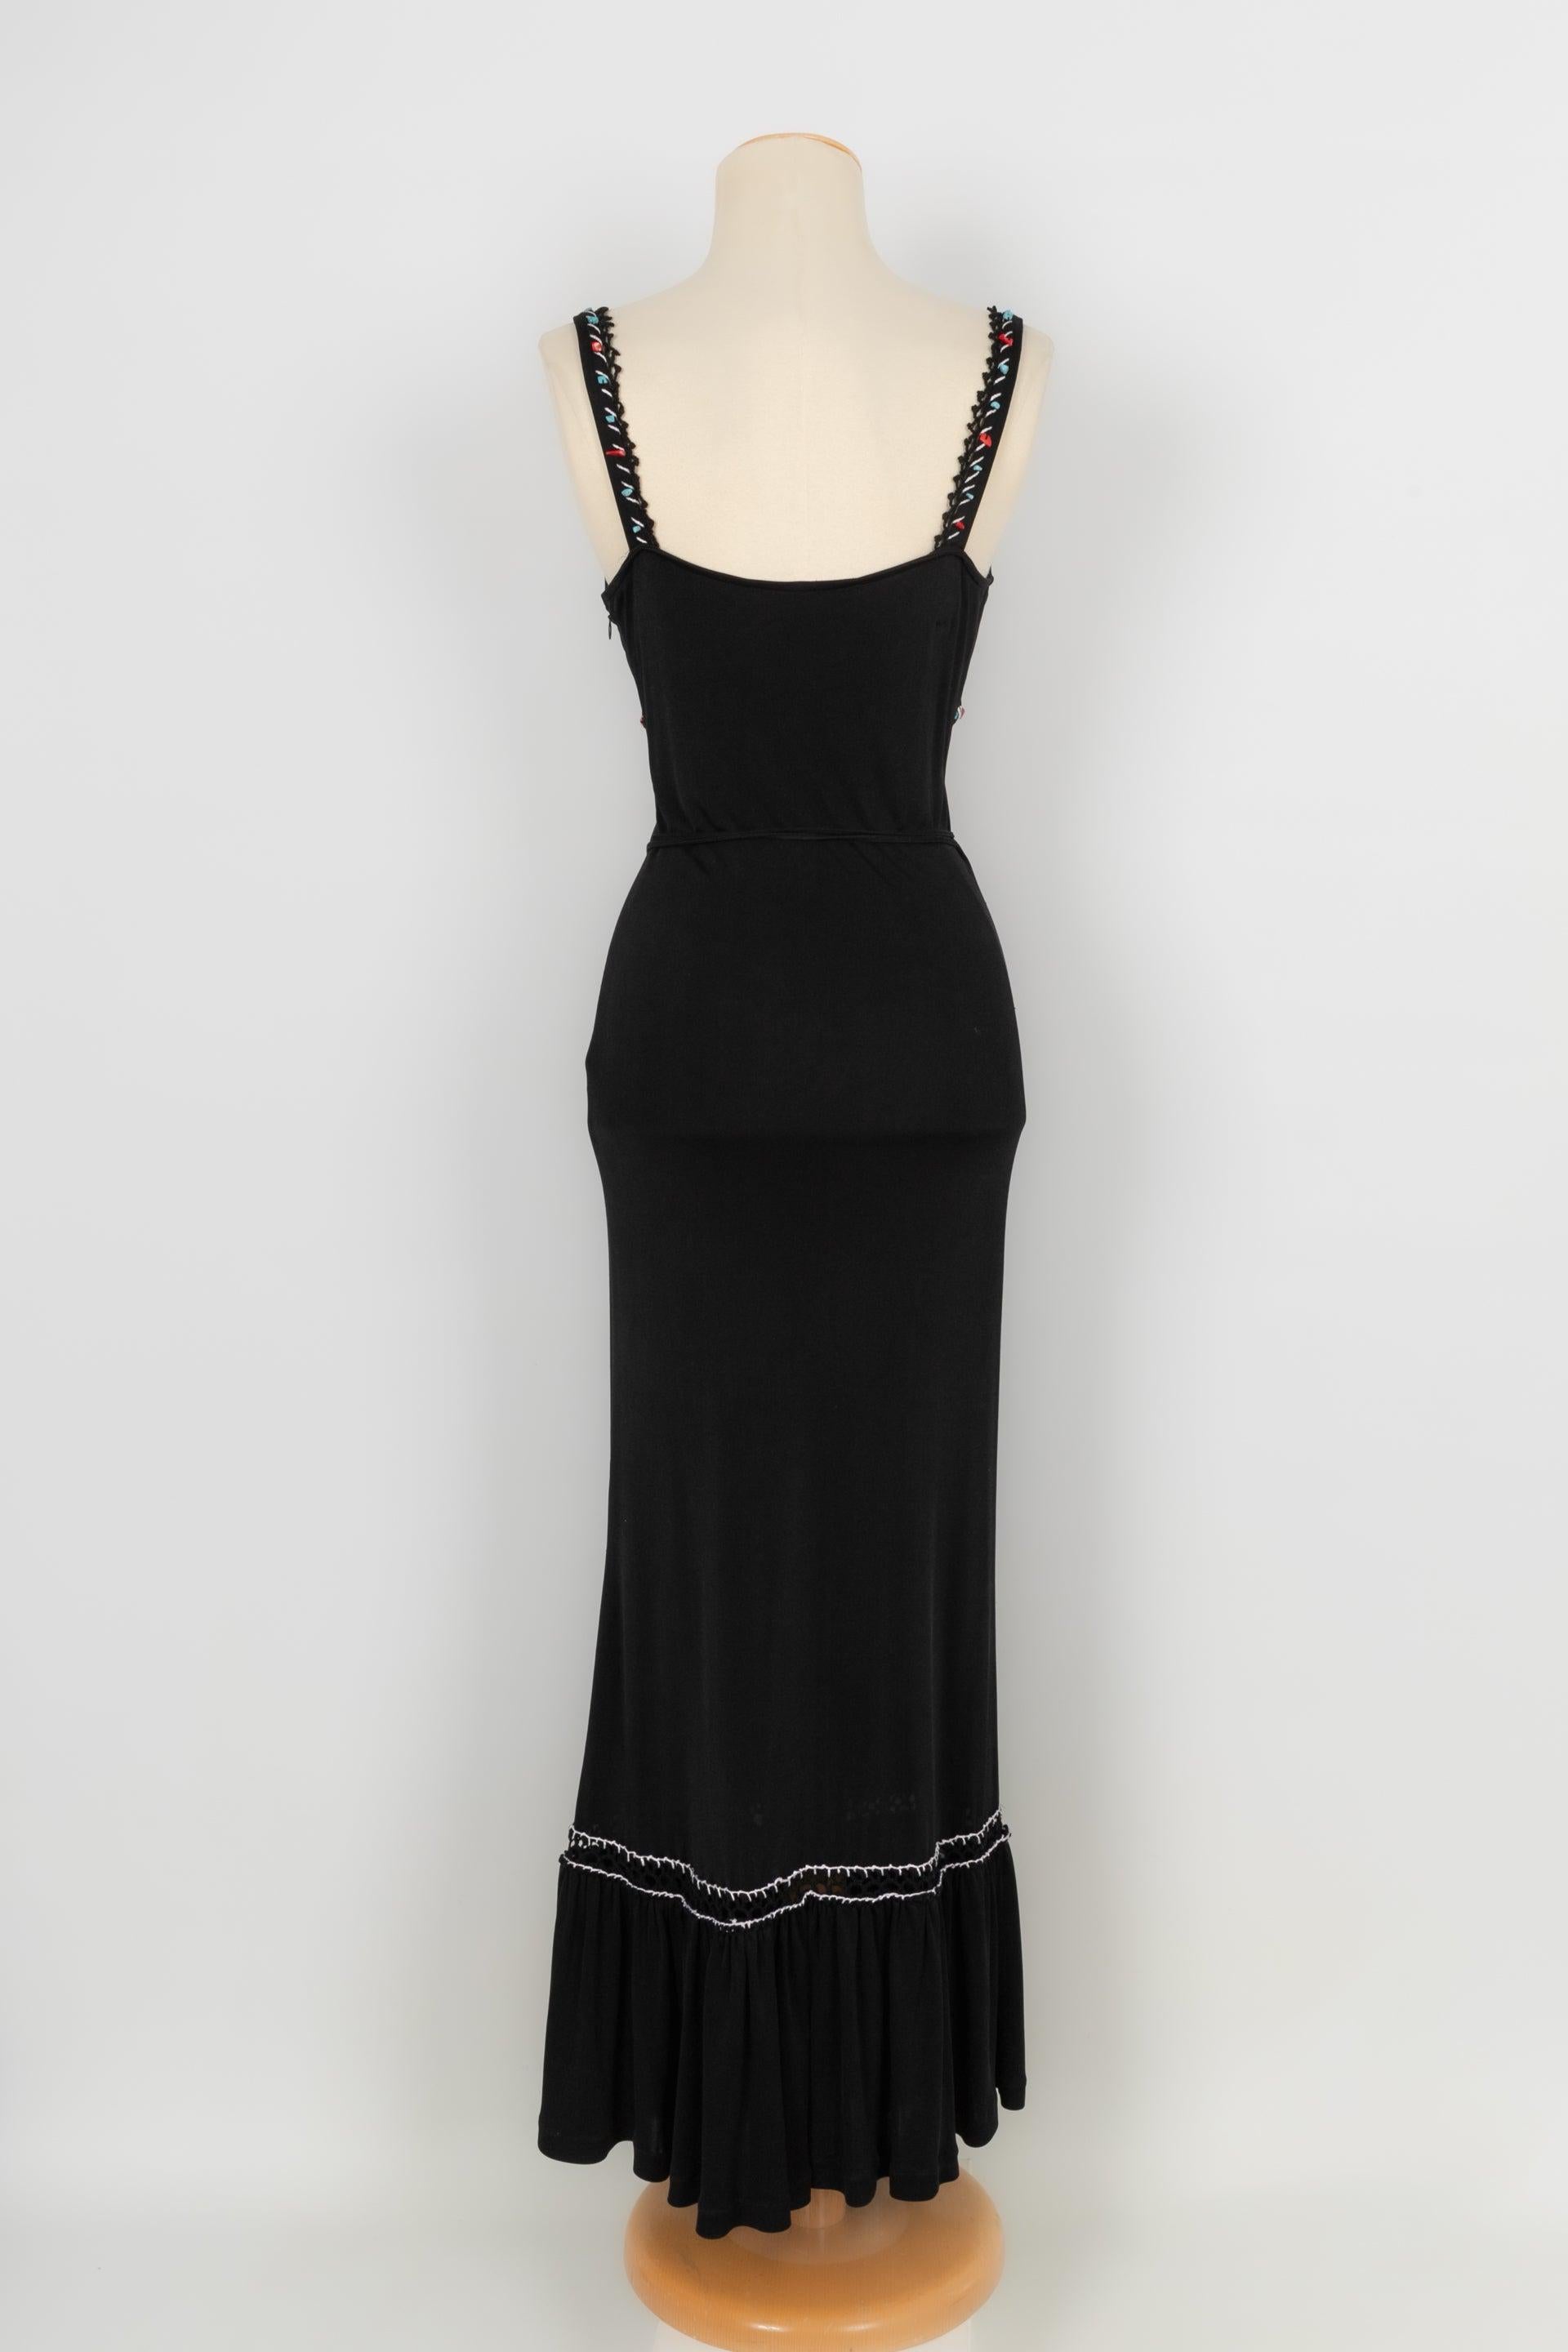 Cavalli  - (Made in Italy) Black jersey long dress embroidered with yarns and pearls. Size 36FR.

Additional information:
Condition: Very good condition
Dimensions: Chest: 34 cm - Length: 150 cm

Seller Reference: VR278
